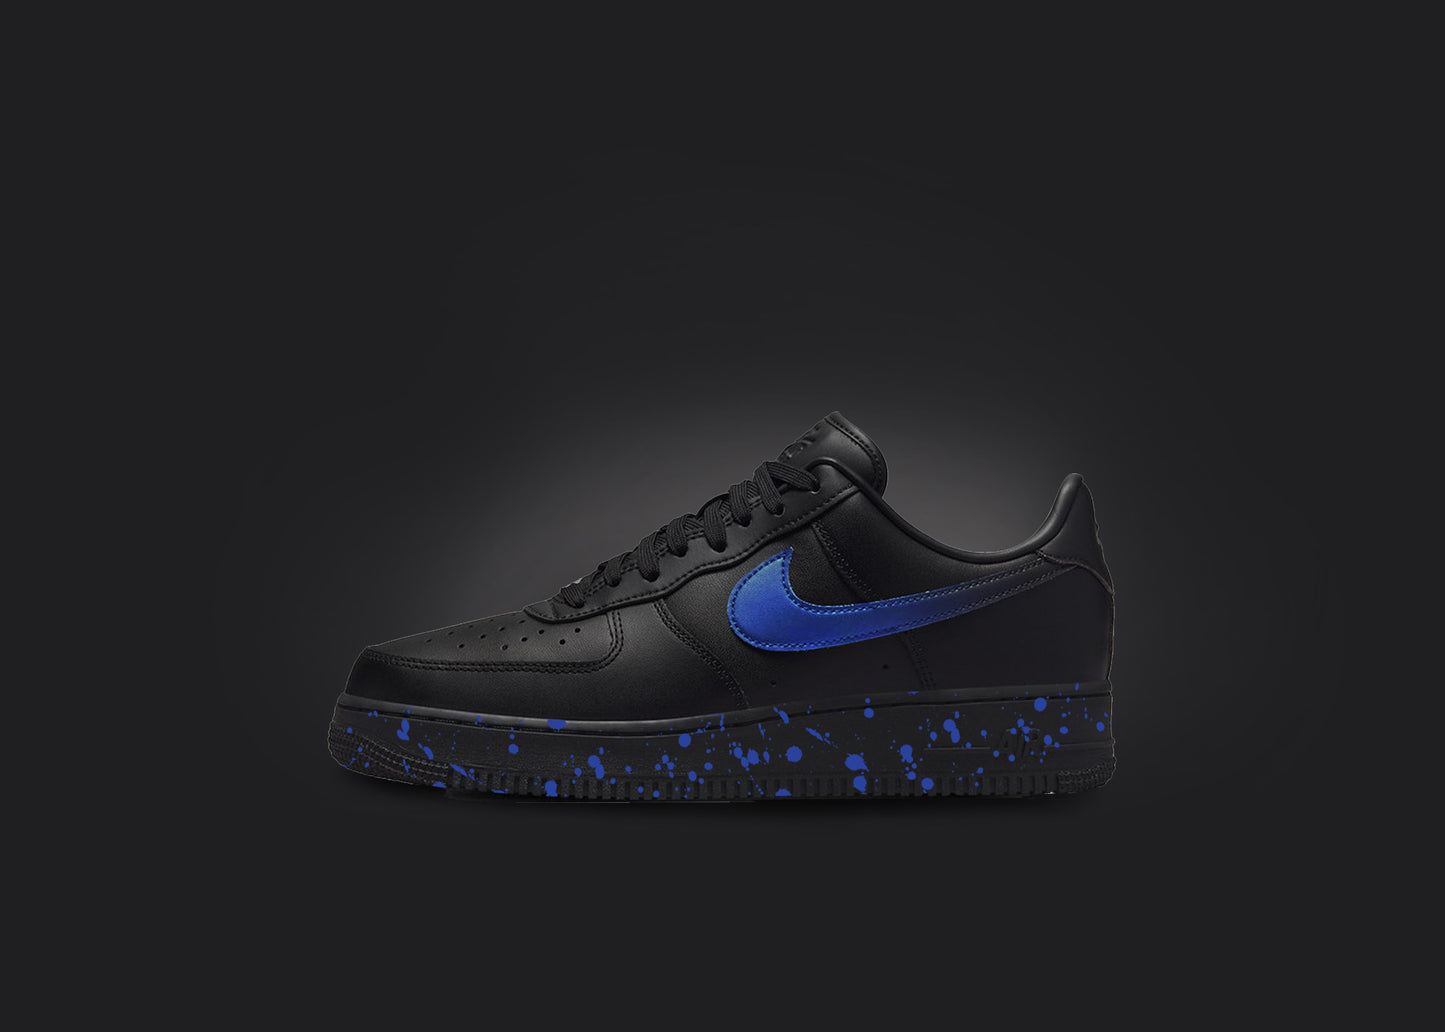 The image is featuring a custom black Air force 1 sneaker on a blank black background. The black nike sneaker has a blue paint splatter design on the sole and a blue fade on the nike logo.